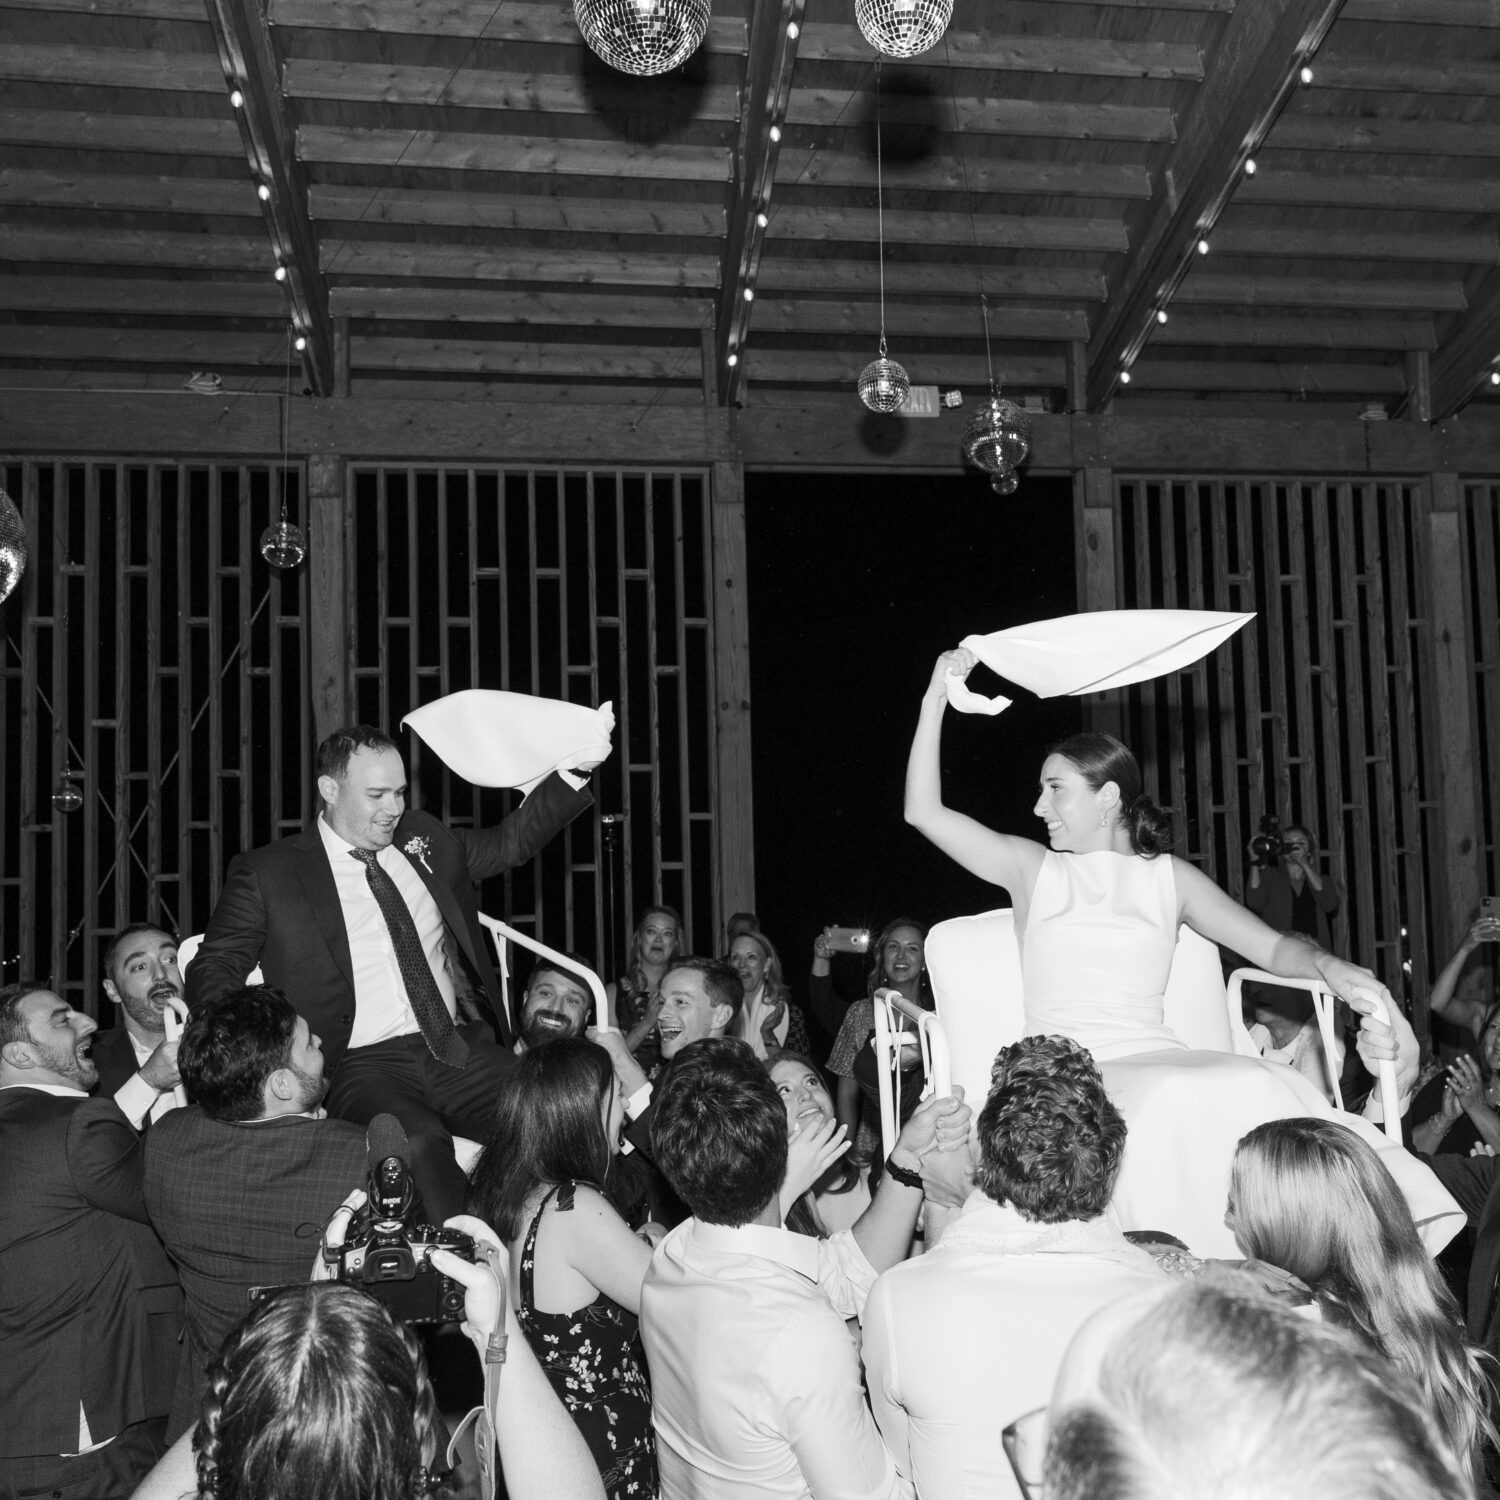 bride and groom dance the hora and are lifted in the air on chairs with napkins waving around their heads as they look at each other.